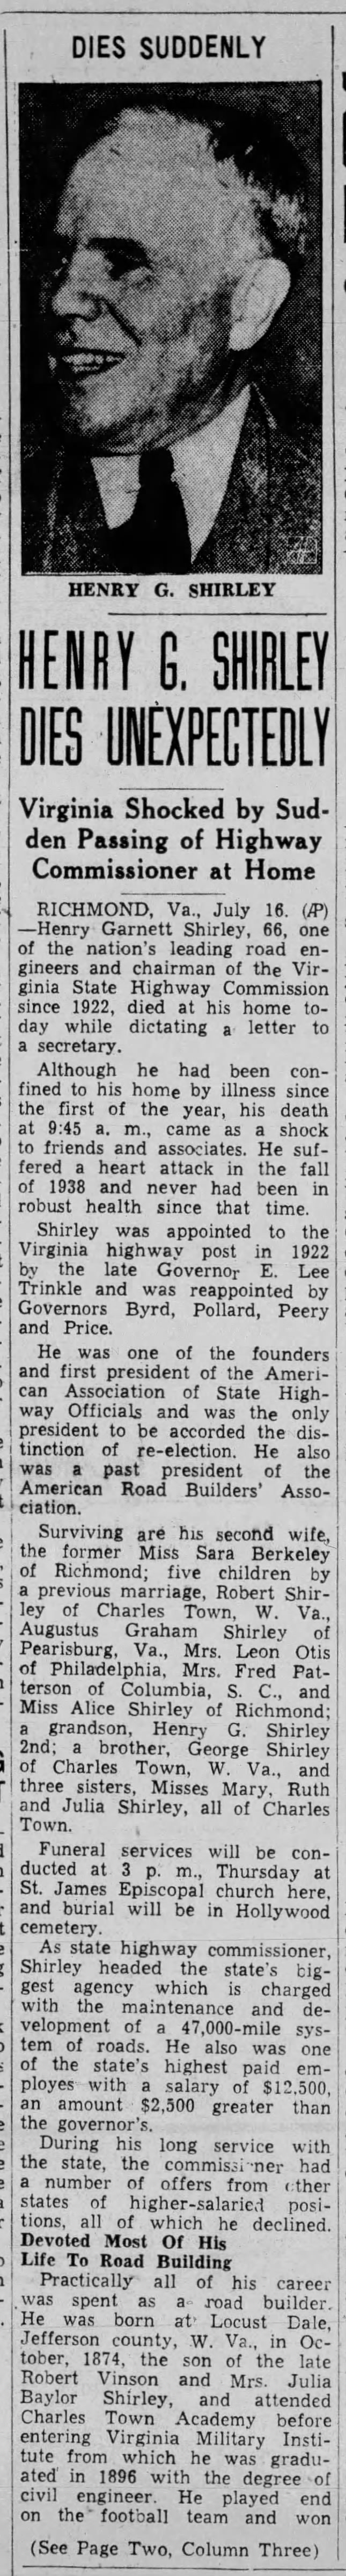 Henry G. Shirley Dies Unexpectedly; 17 Jul 1941; The Bristol Herald Courier; 1